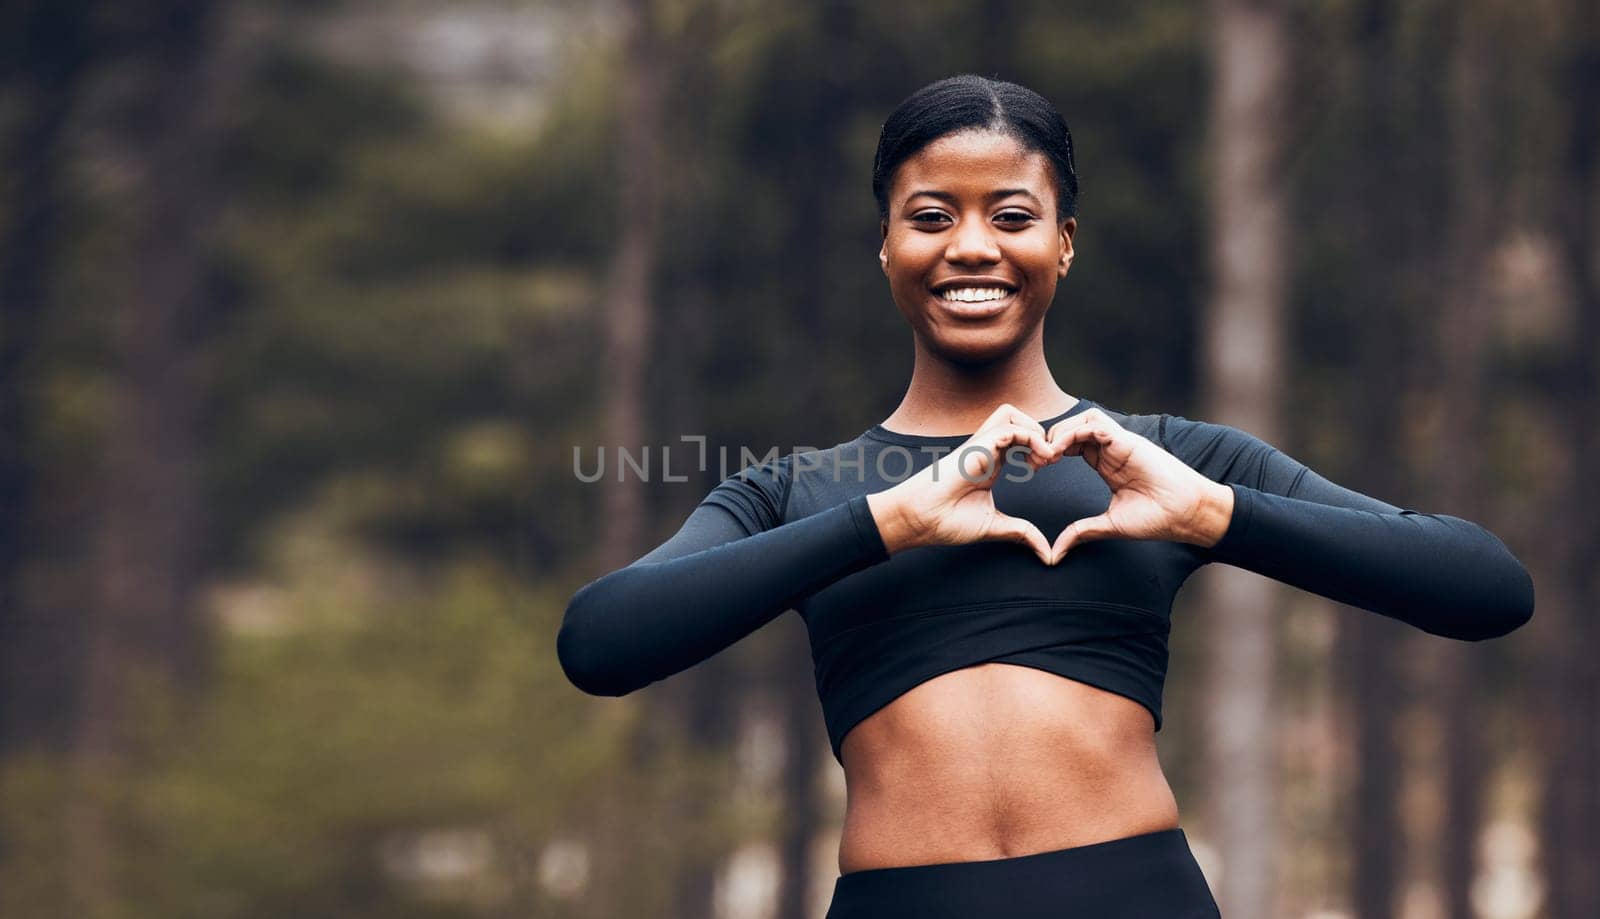 Heart hand, black woman and fitness in nature with exercise and fitness with love gesture. Sport, female person and support outdoor by the trees after a run with romance sign from a workout in park.